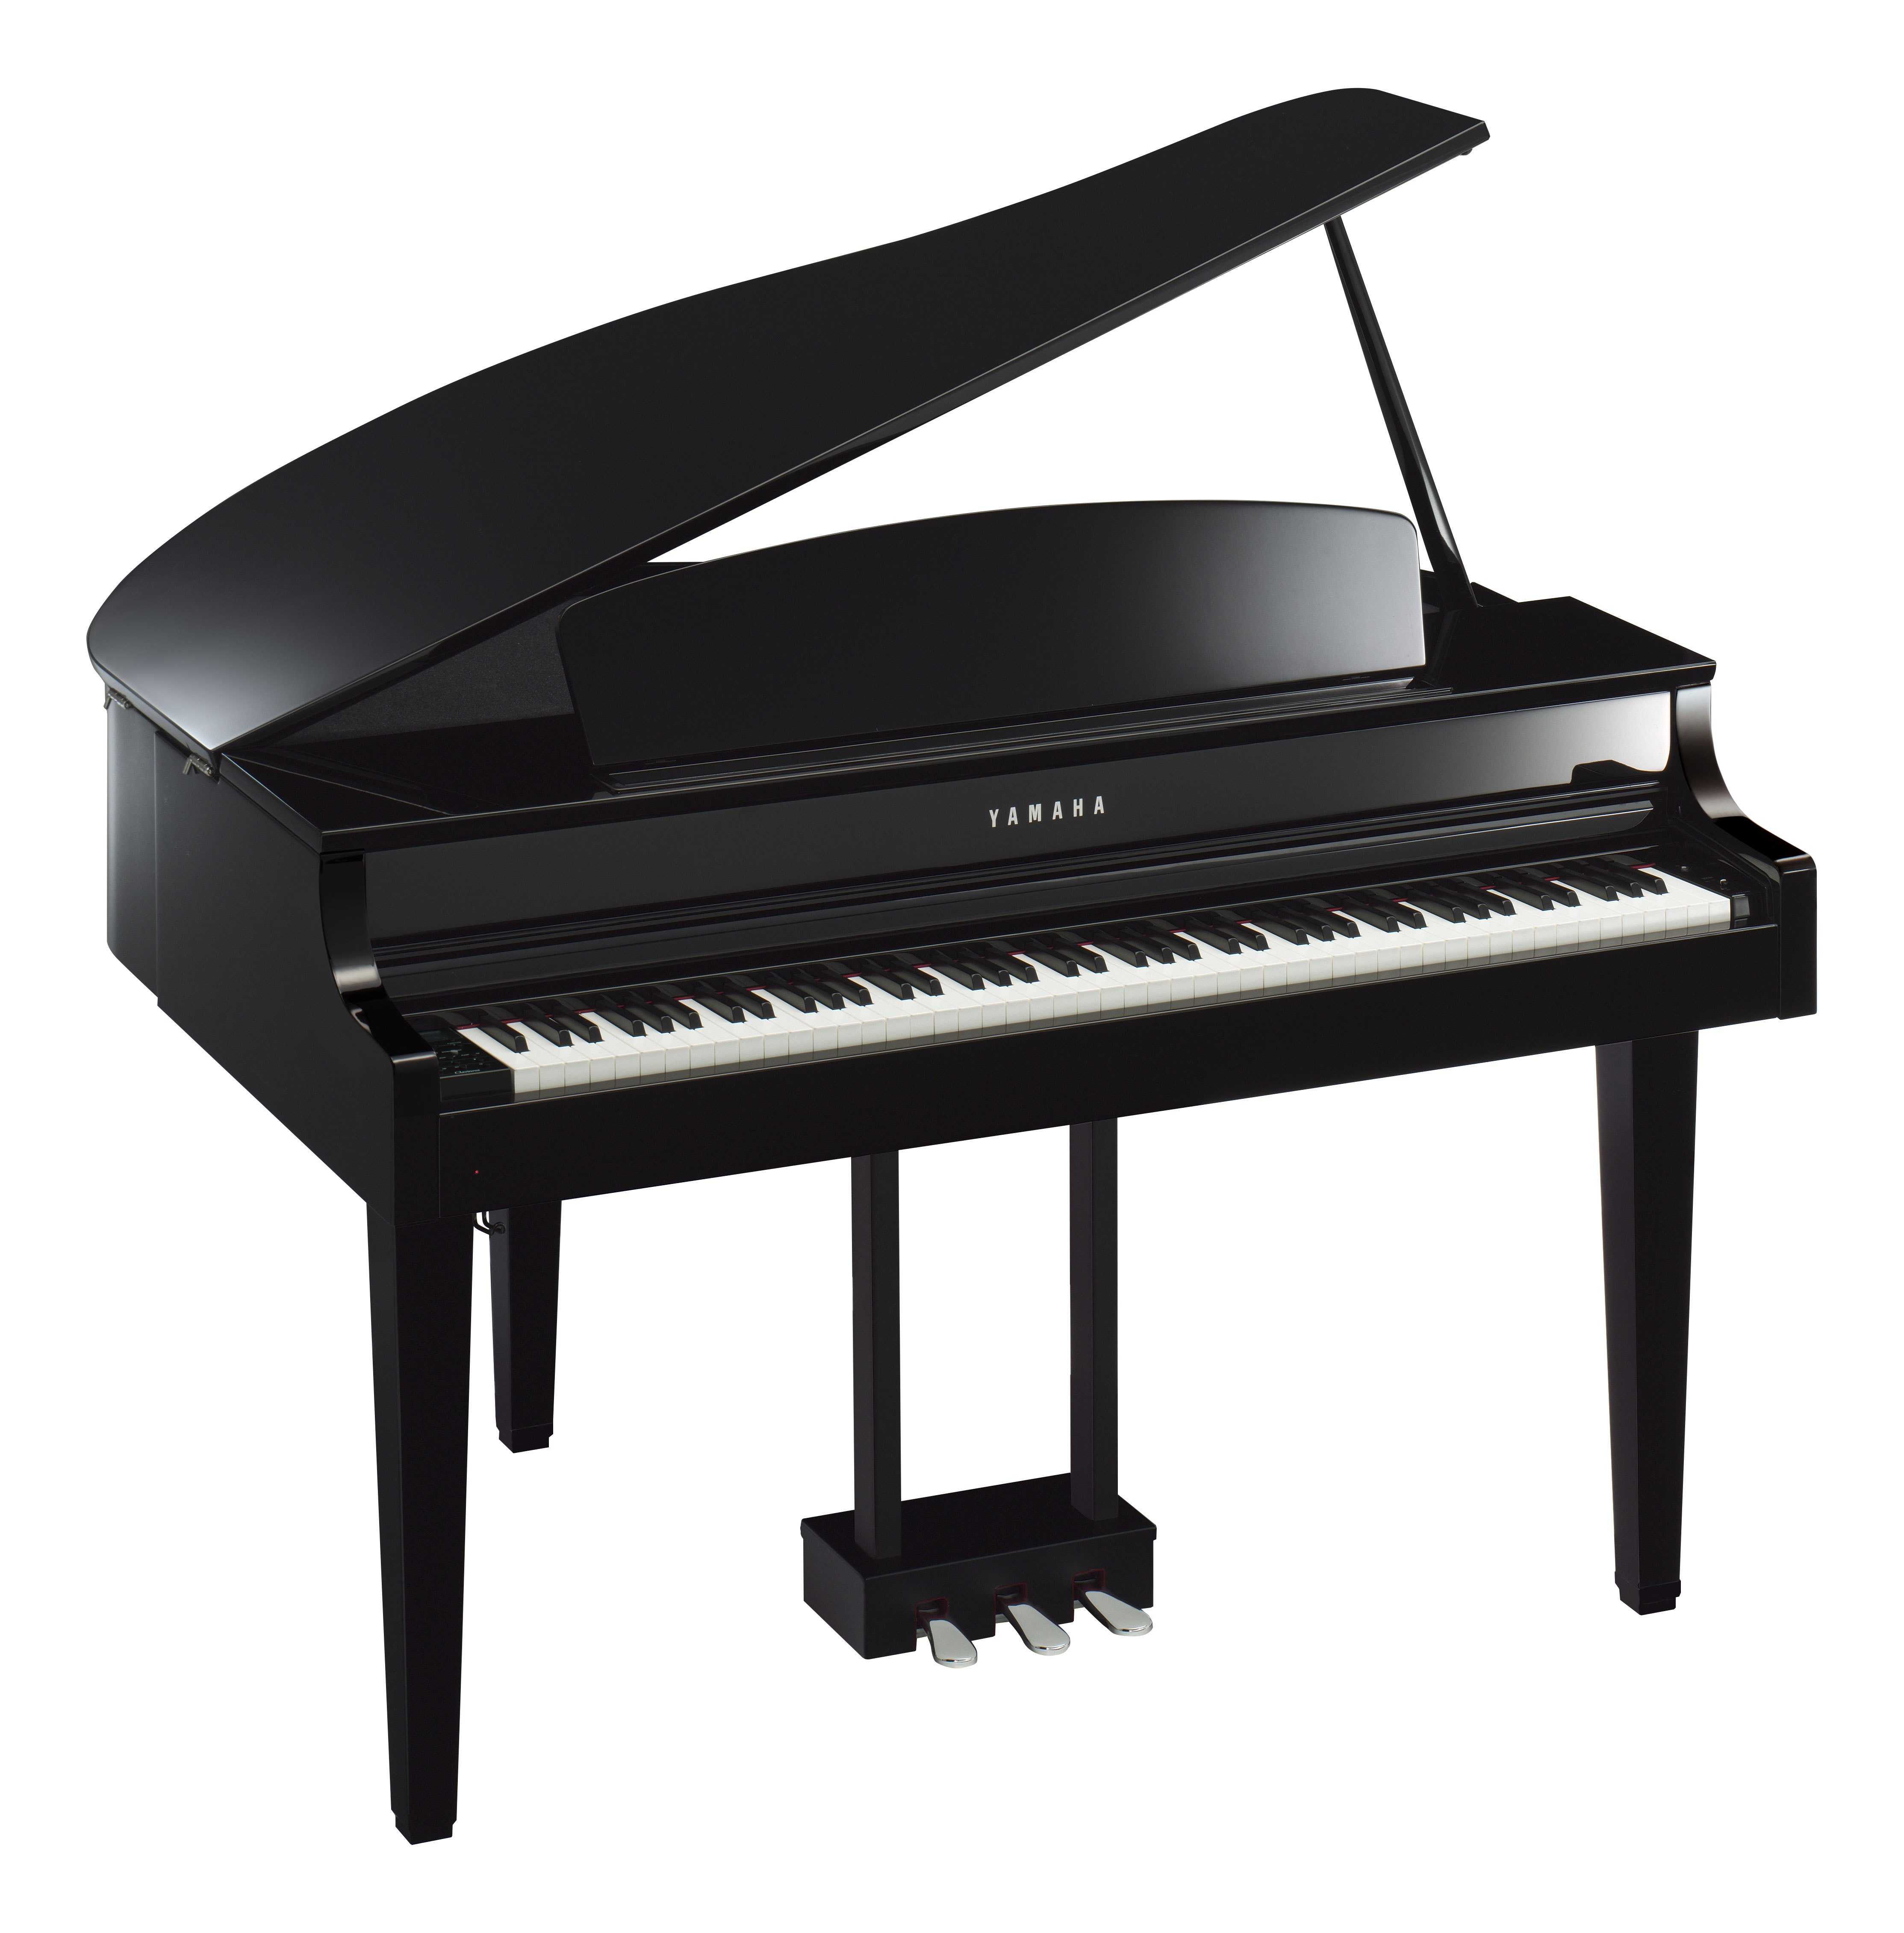 Host of Every week apparatus CLP-665GP - Overview - Clavinova - Pianos - Musical Instruments - Products  - Yamaha USA